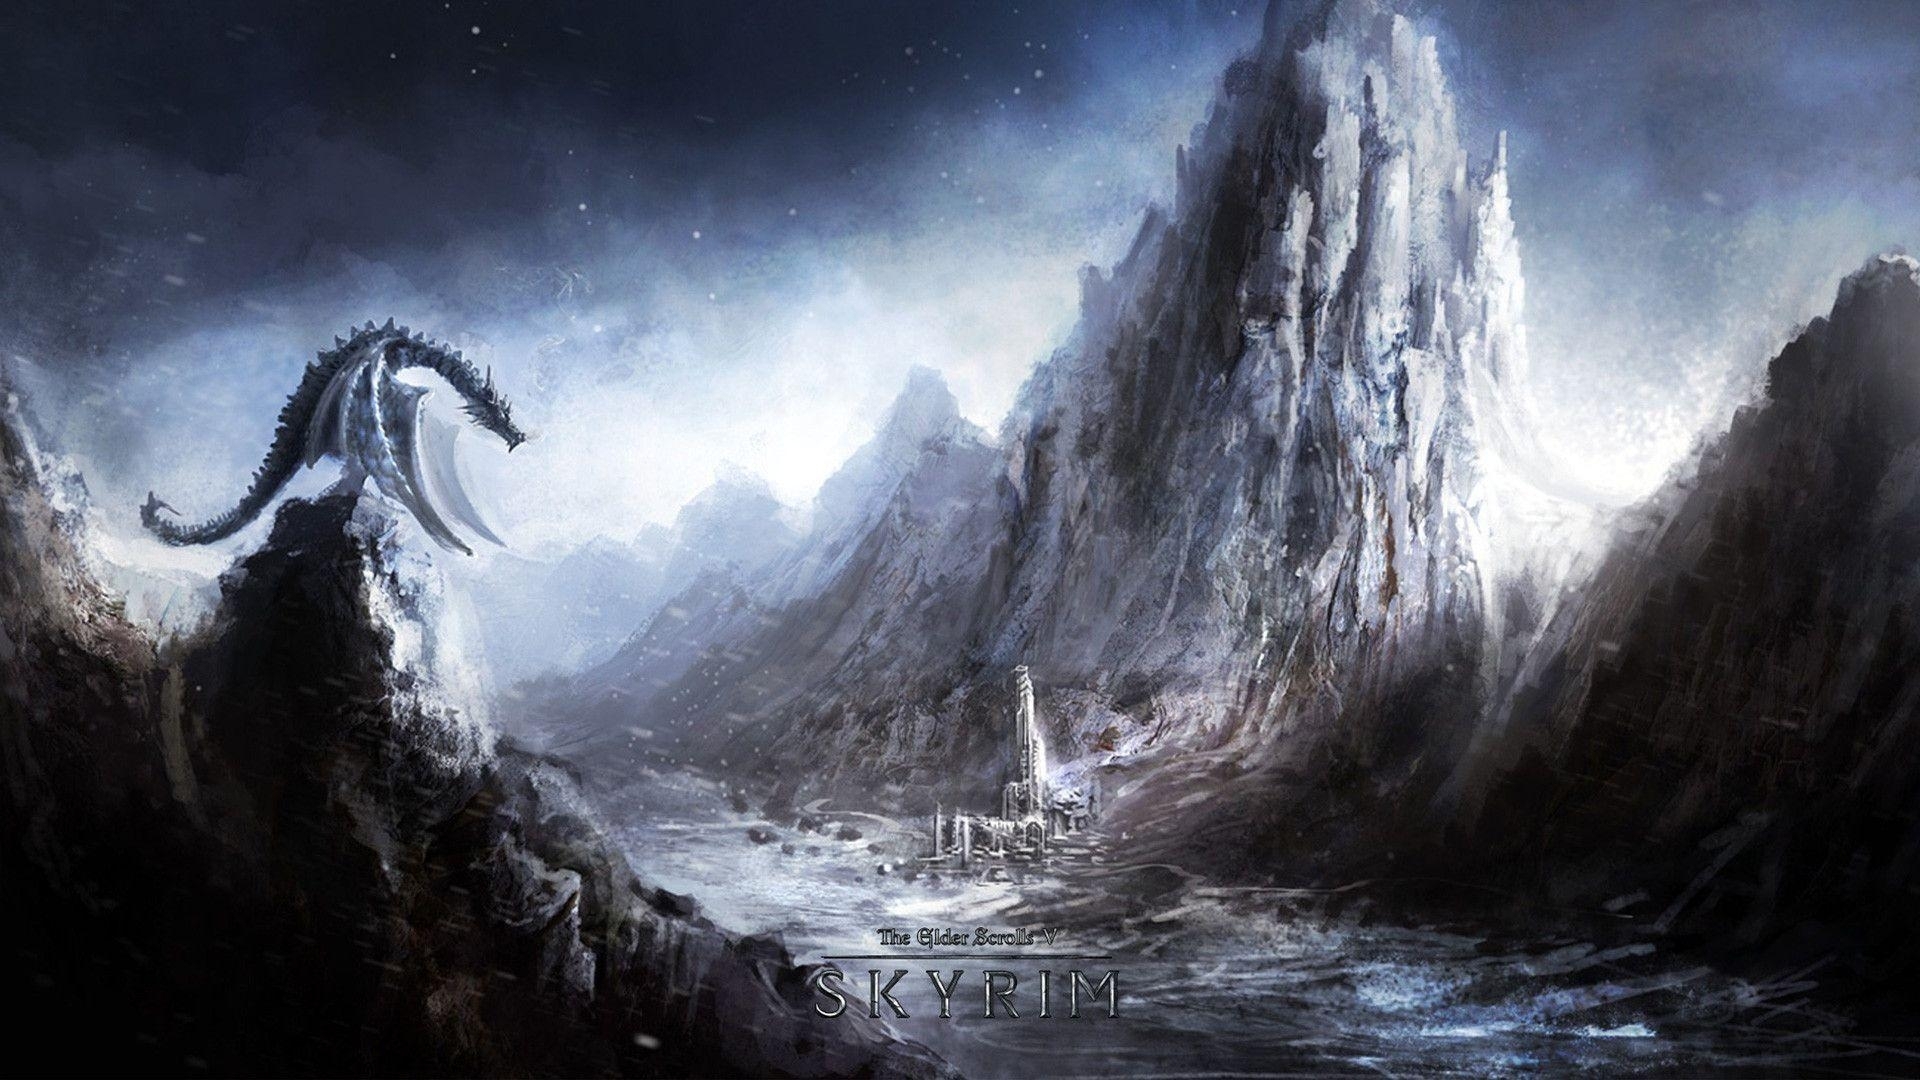 10 Latest Skyrim Hd Wallpapers 1920X1080 FULL HD 1920×1080 For PC Background